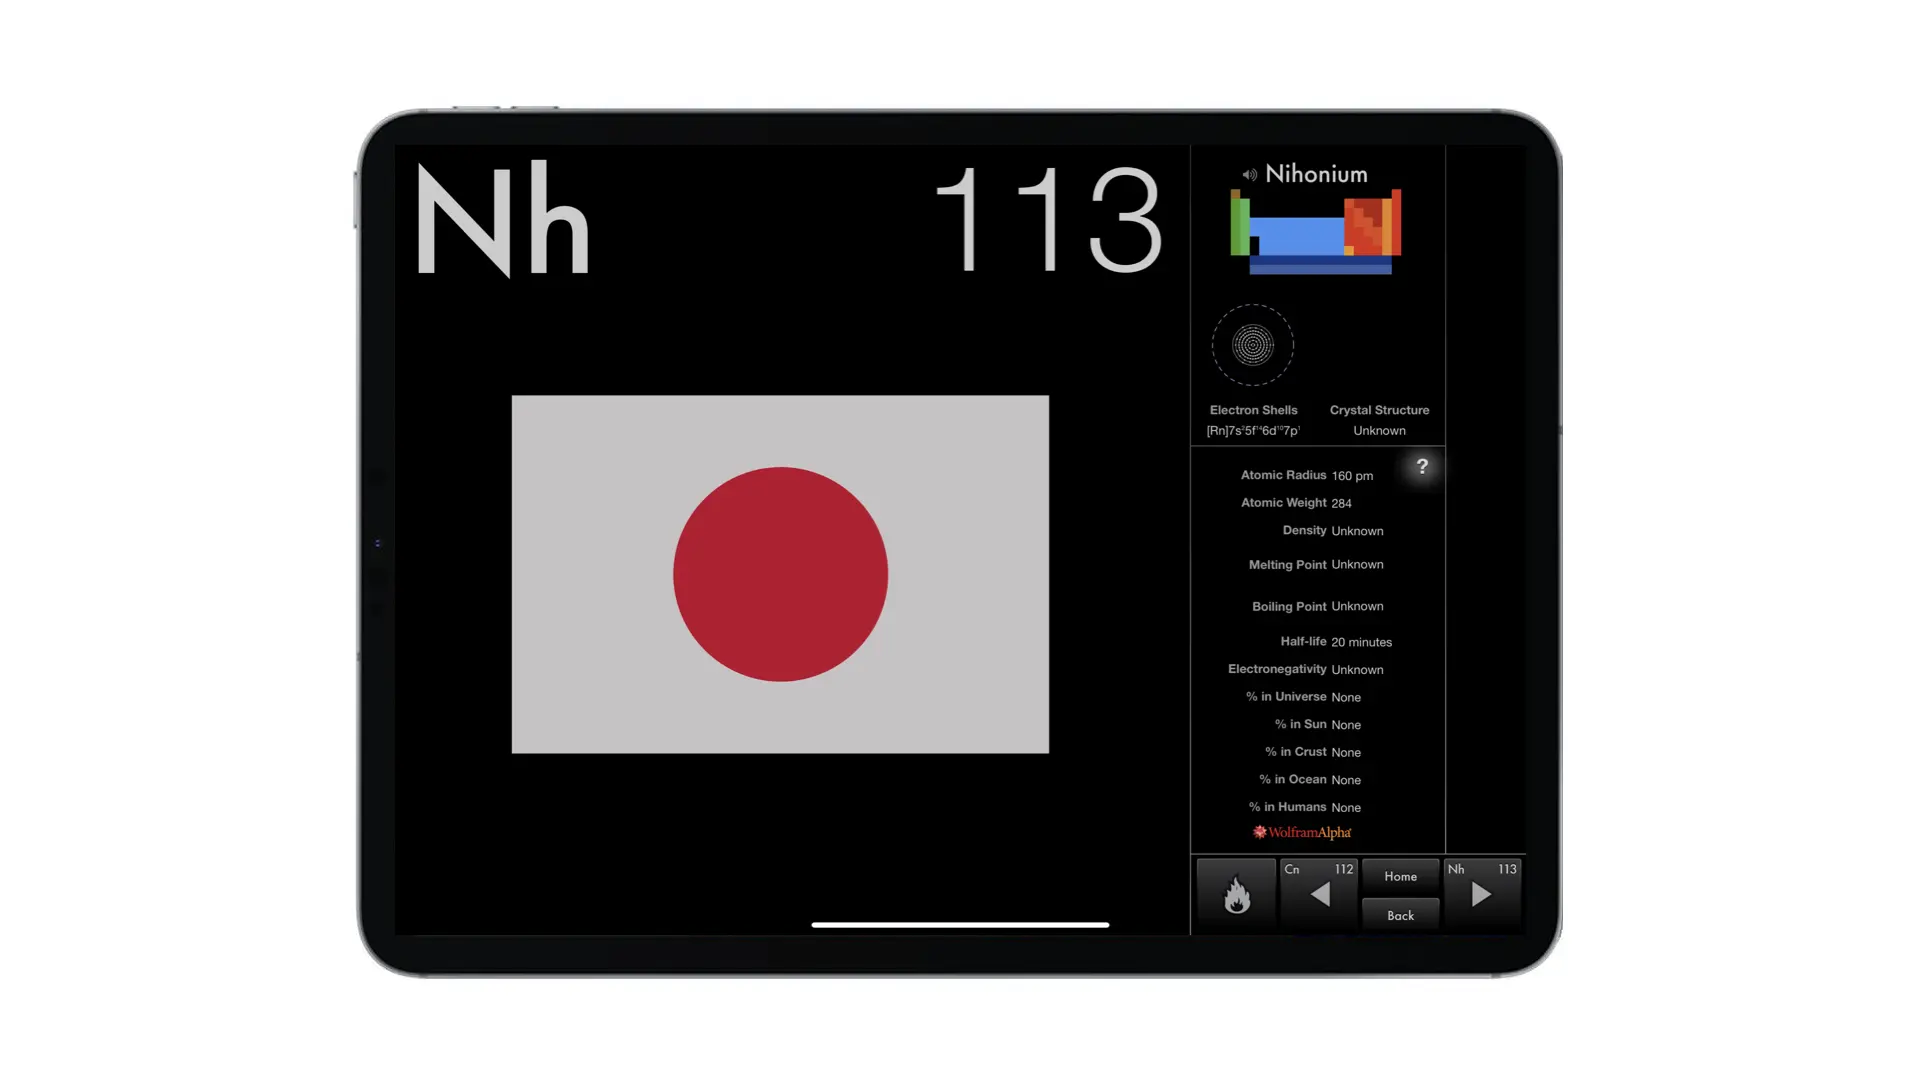 A screenshot from The Elements iPad app showing the various attributes of Nihonium